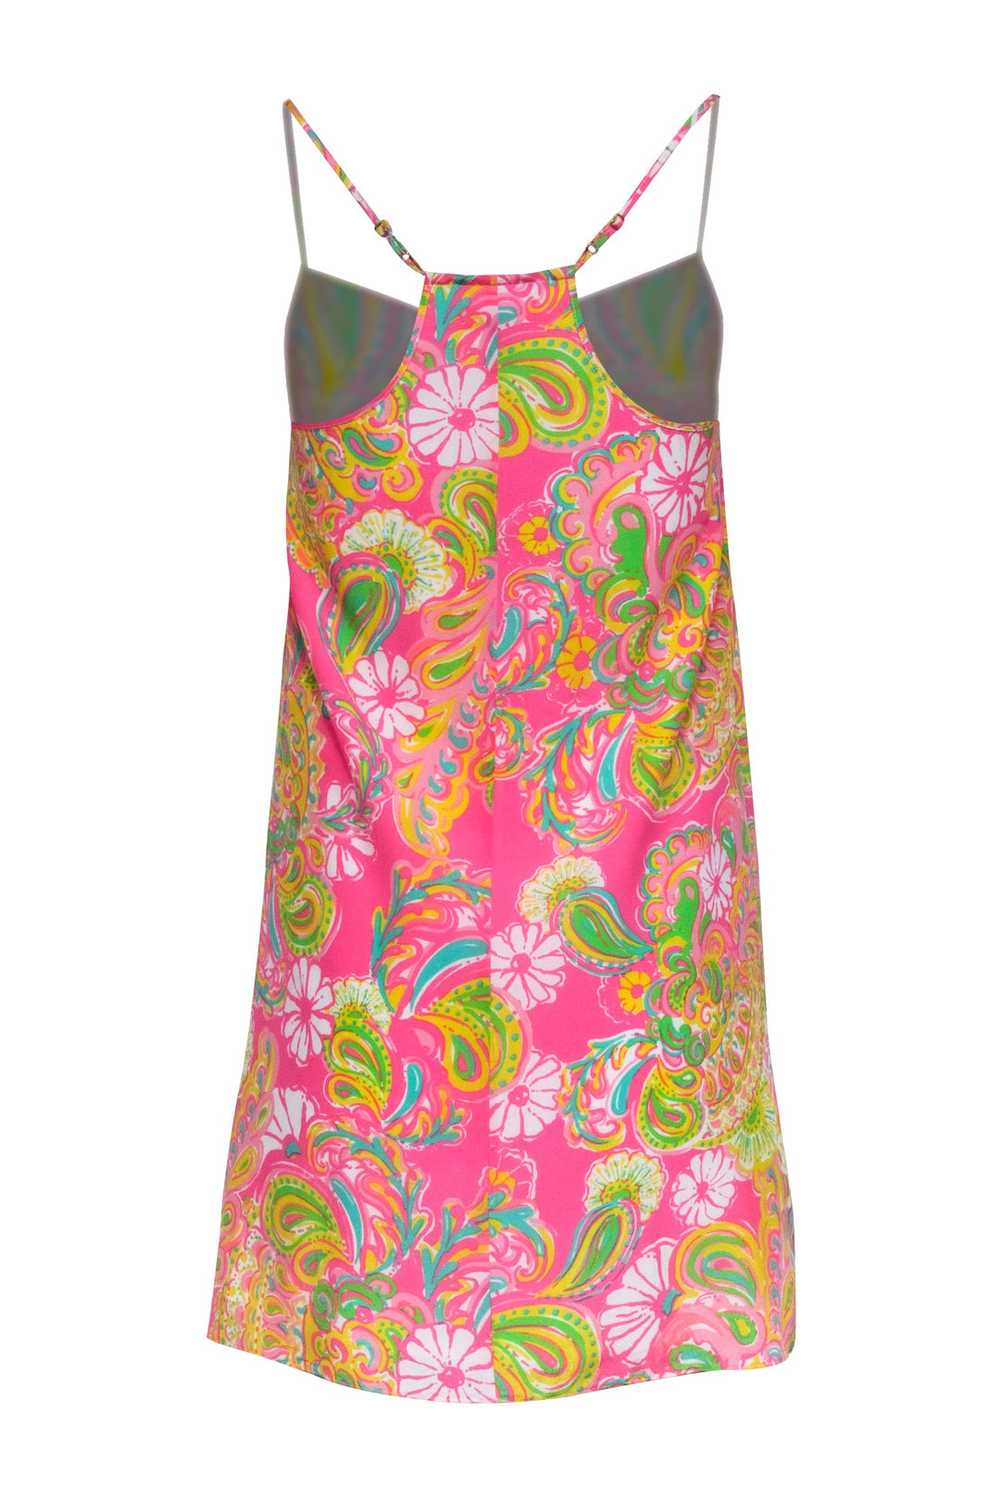 Lilly Pulitzer - Pink, White, & Yellow Paisley Pr… - image 3